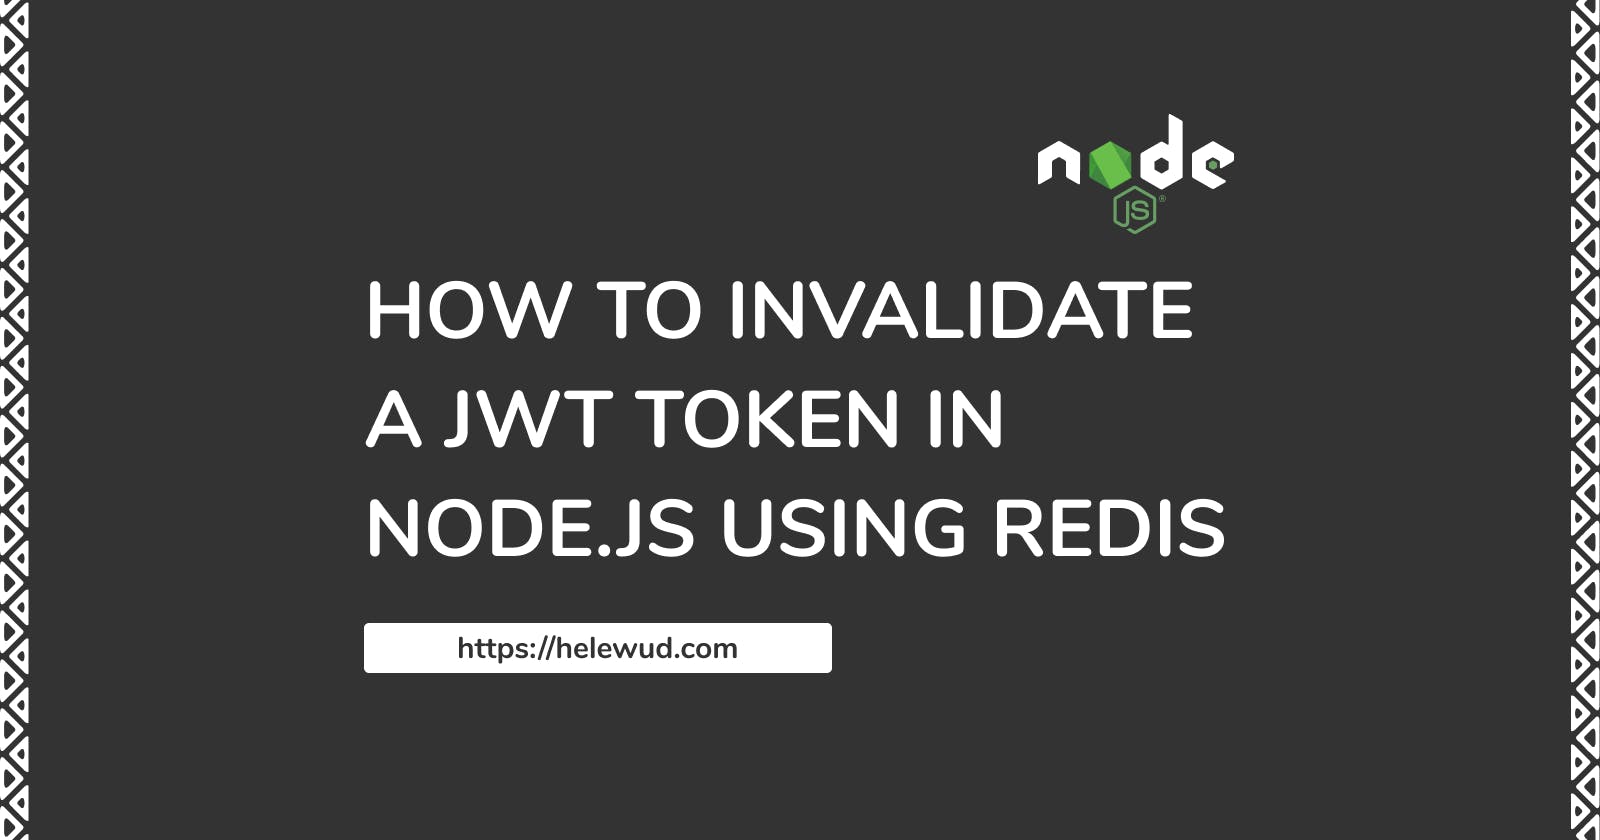 How to Invalidate a JWT in Node.js Using Redis Cache